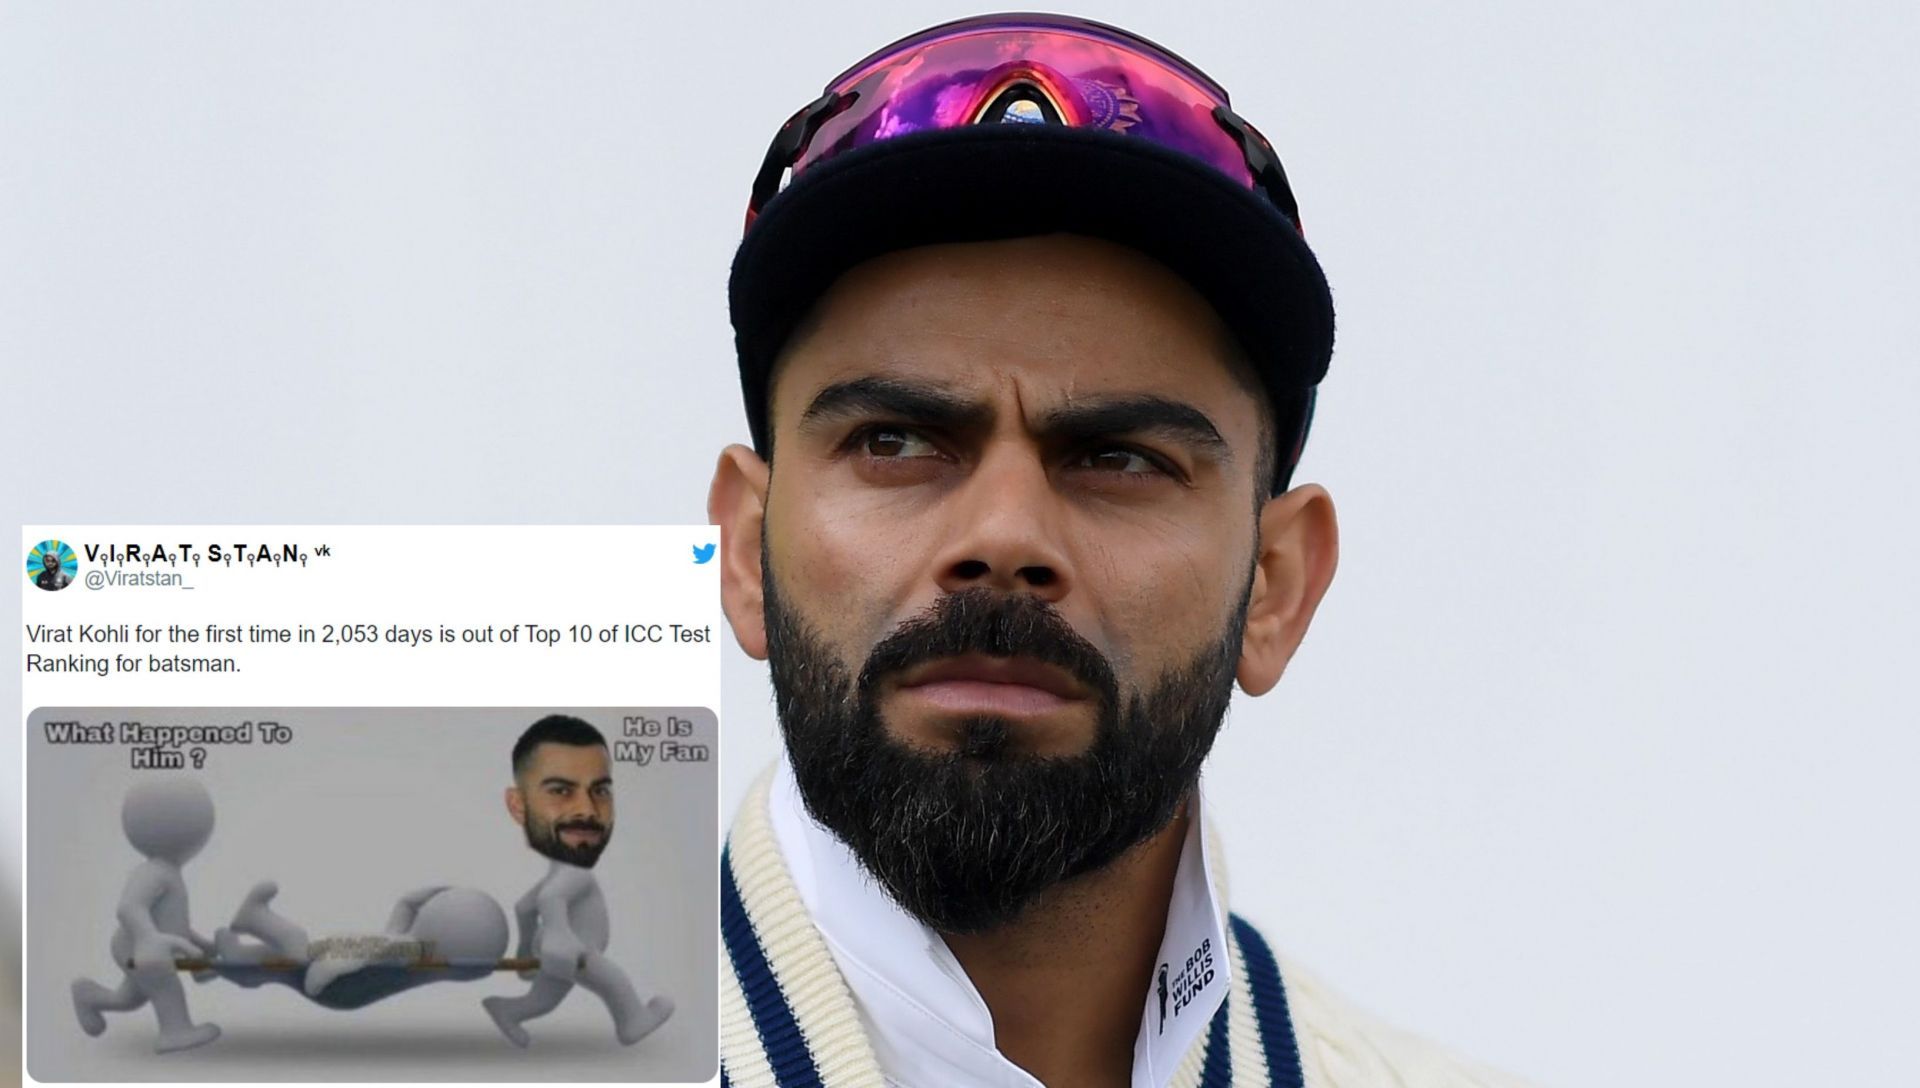 Virat Kohli has crashed out of the top 10 in Test rankings after almost six years.